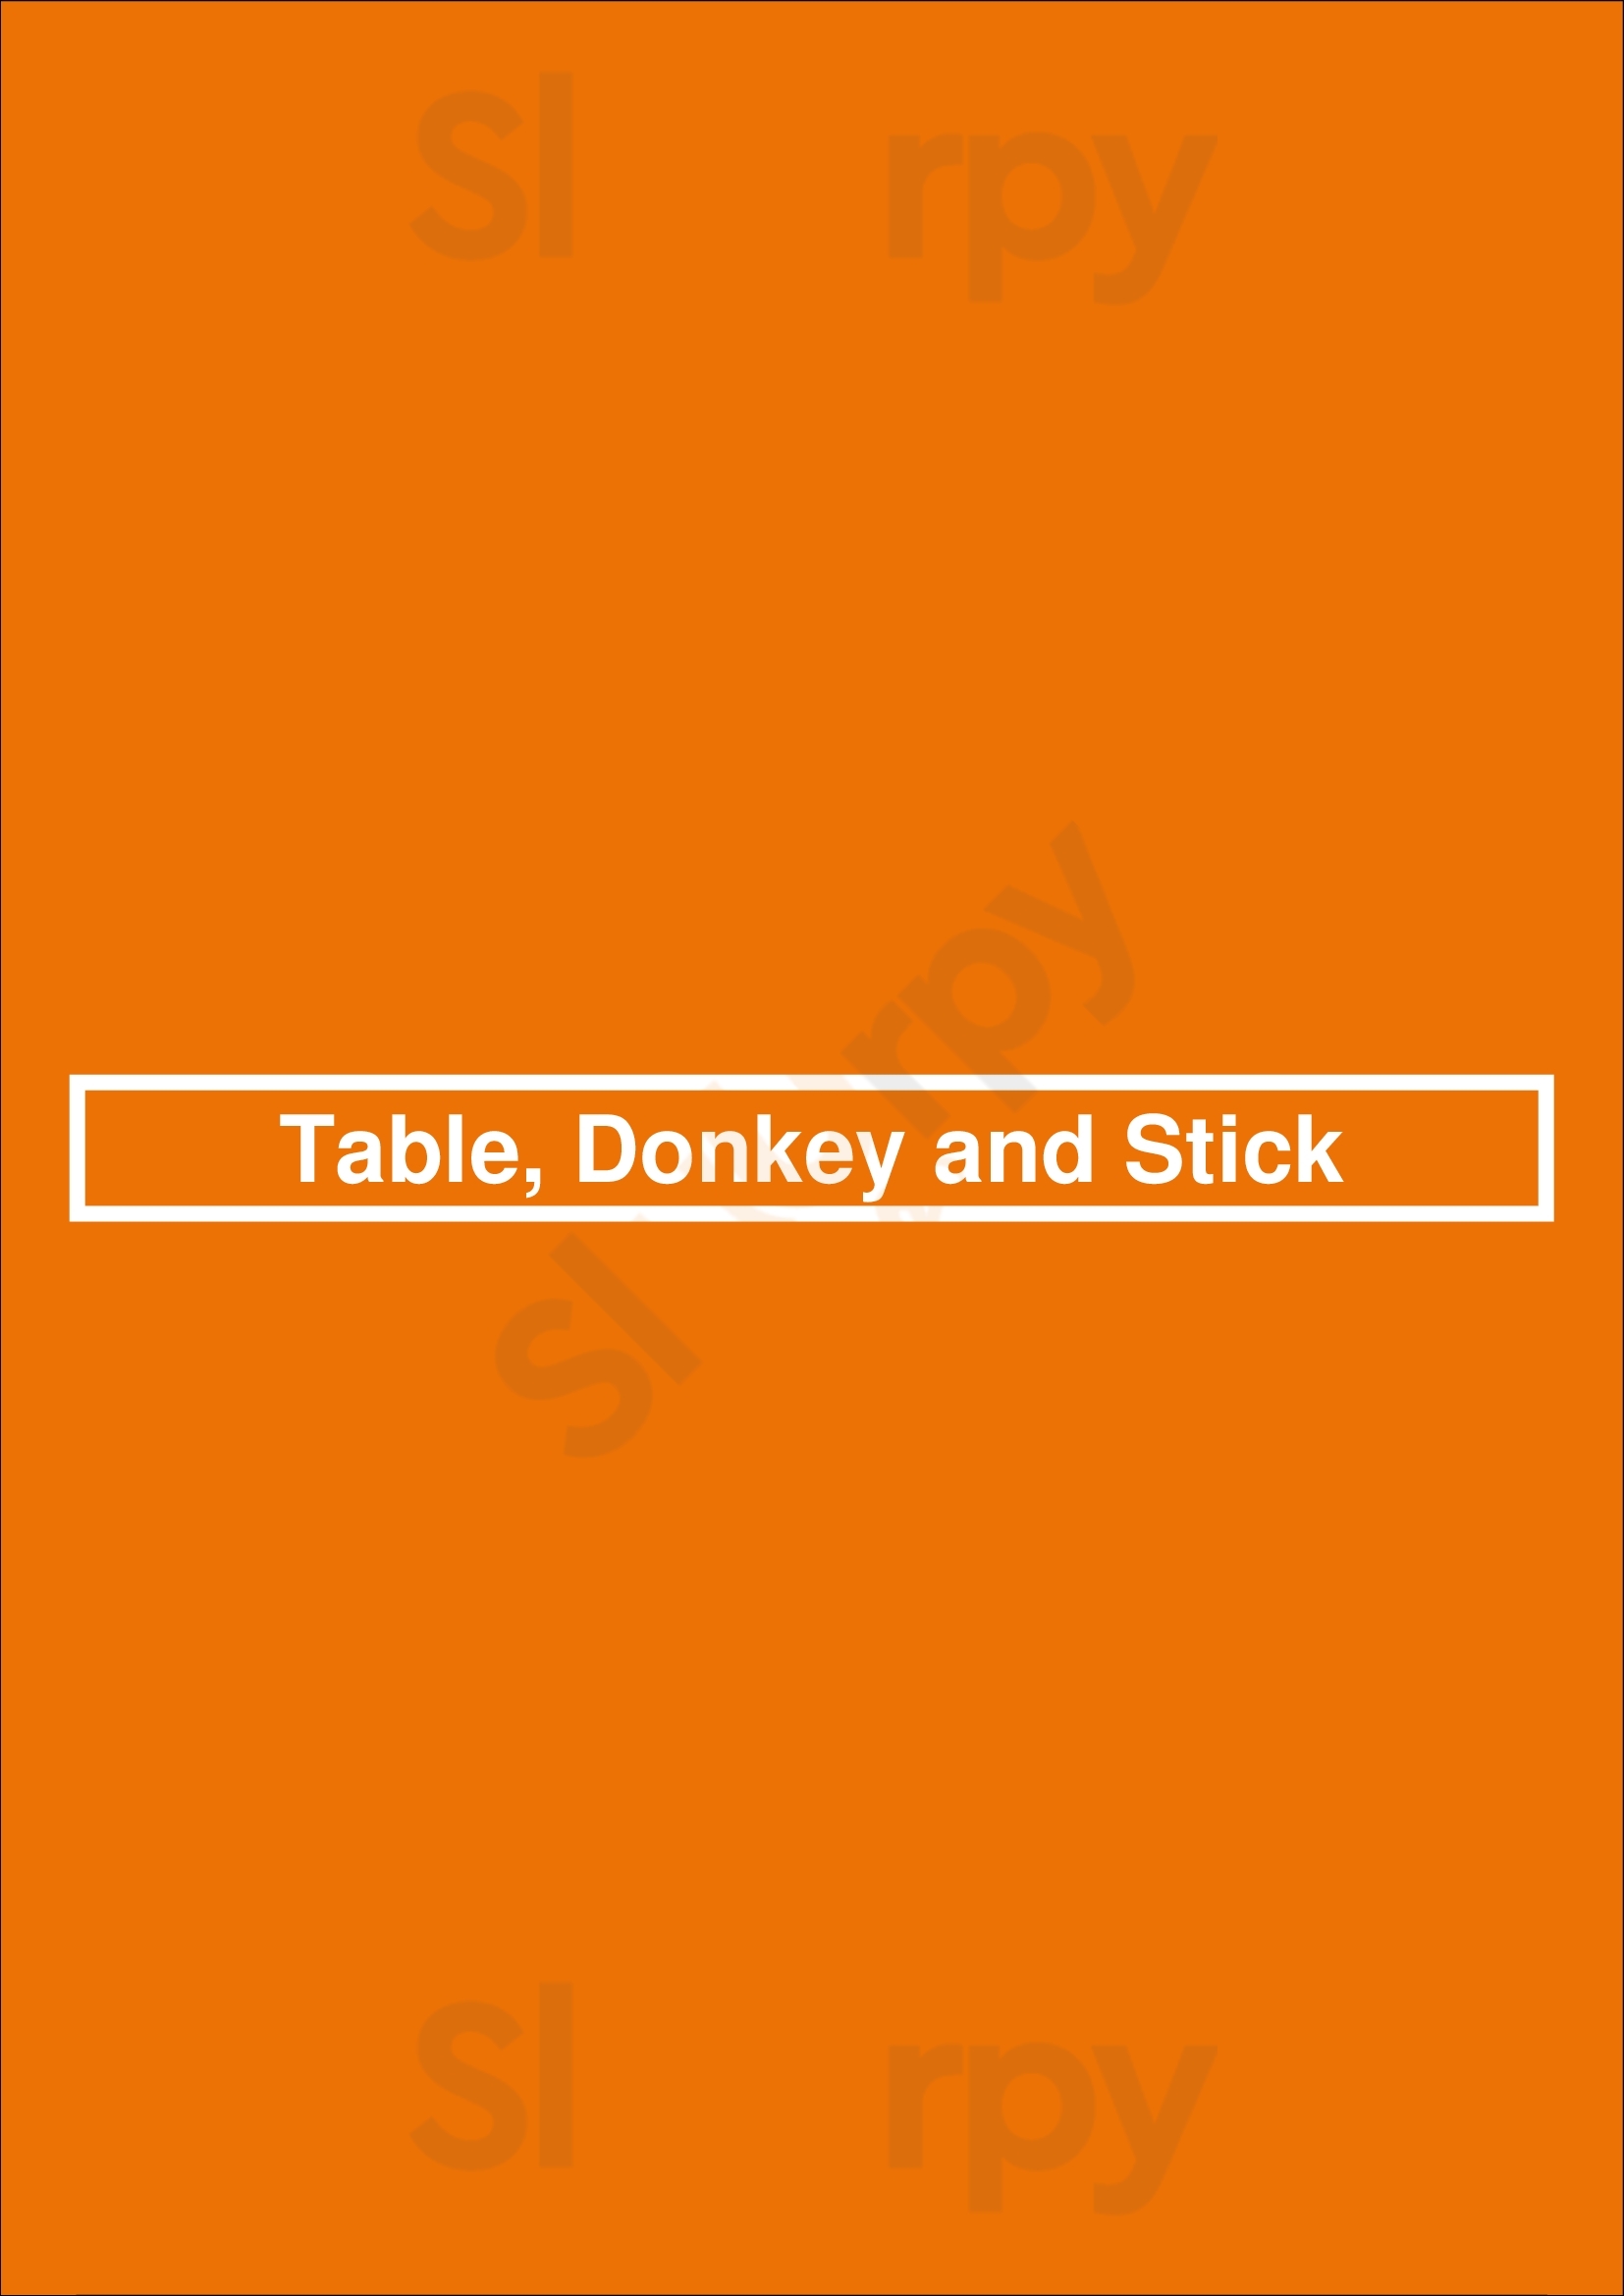 Table, Donkey And Stick Chicago Menu - 1